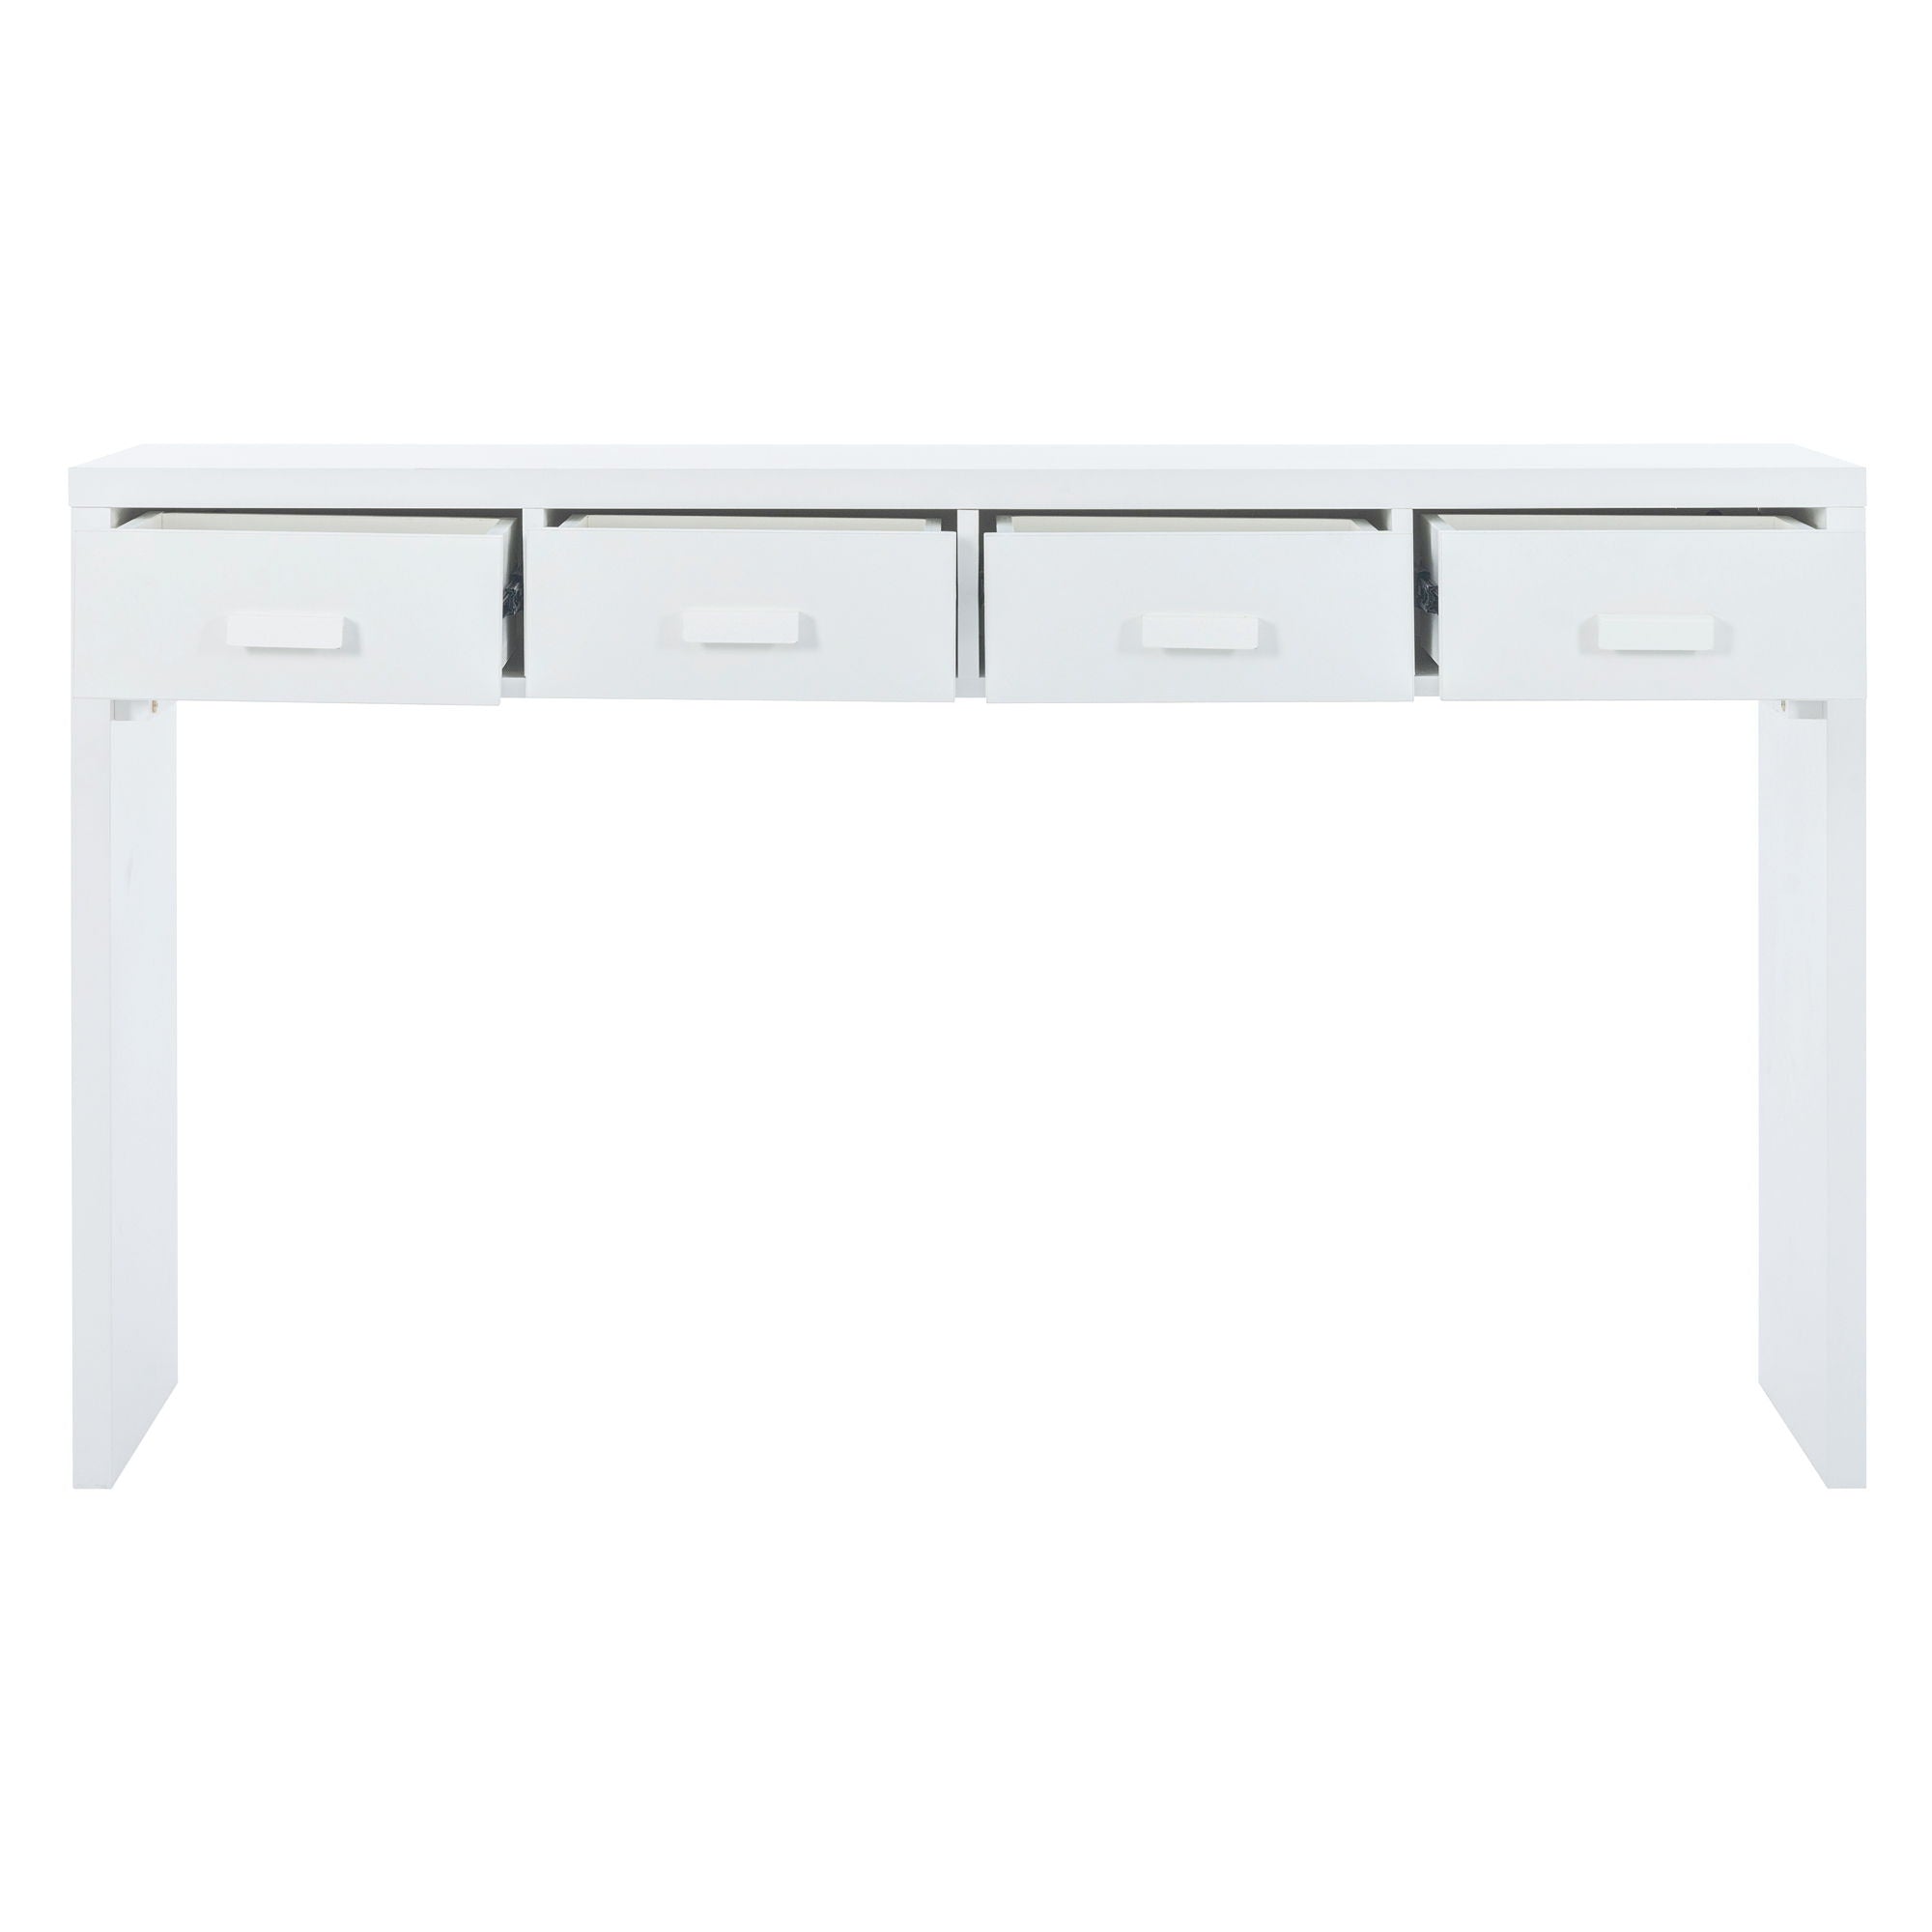 Trexm Modern Minimalist Console Table With Open Tabletop And Four Drawers With Metal Handles For Entry Way, Living Room And Dining Room (White)